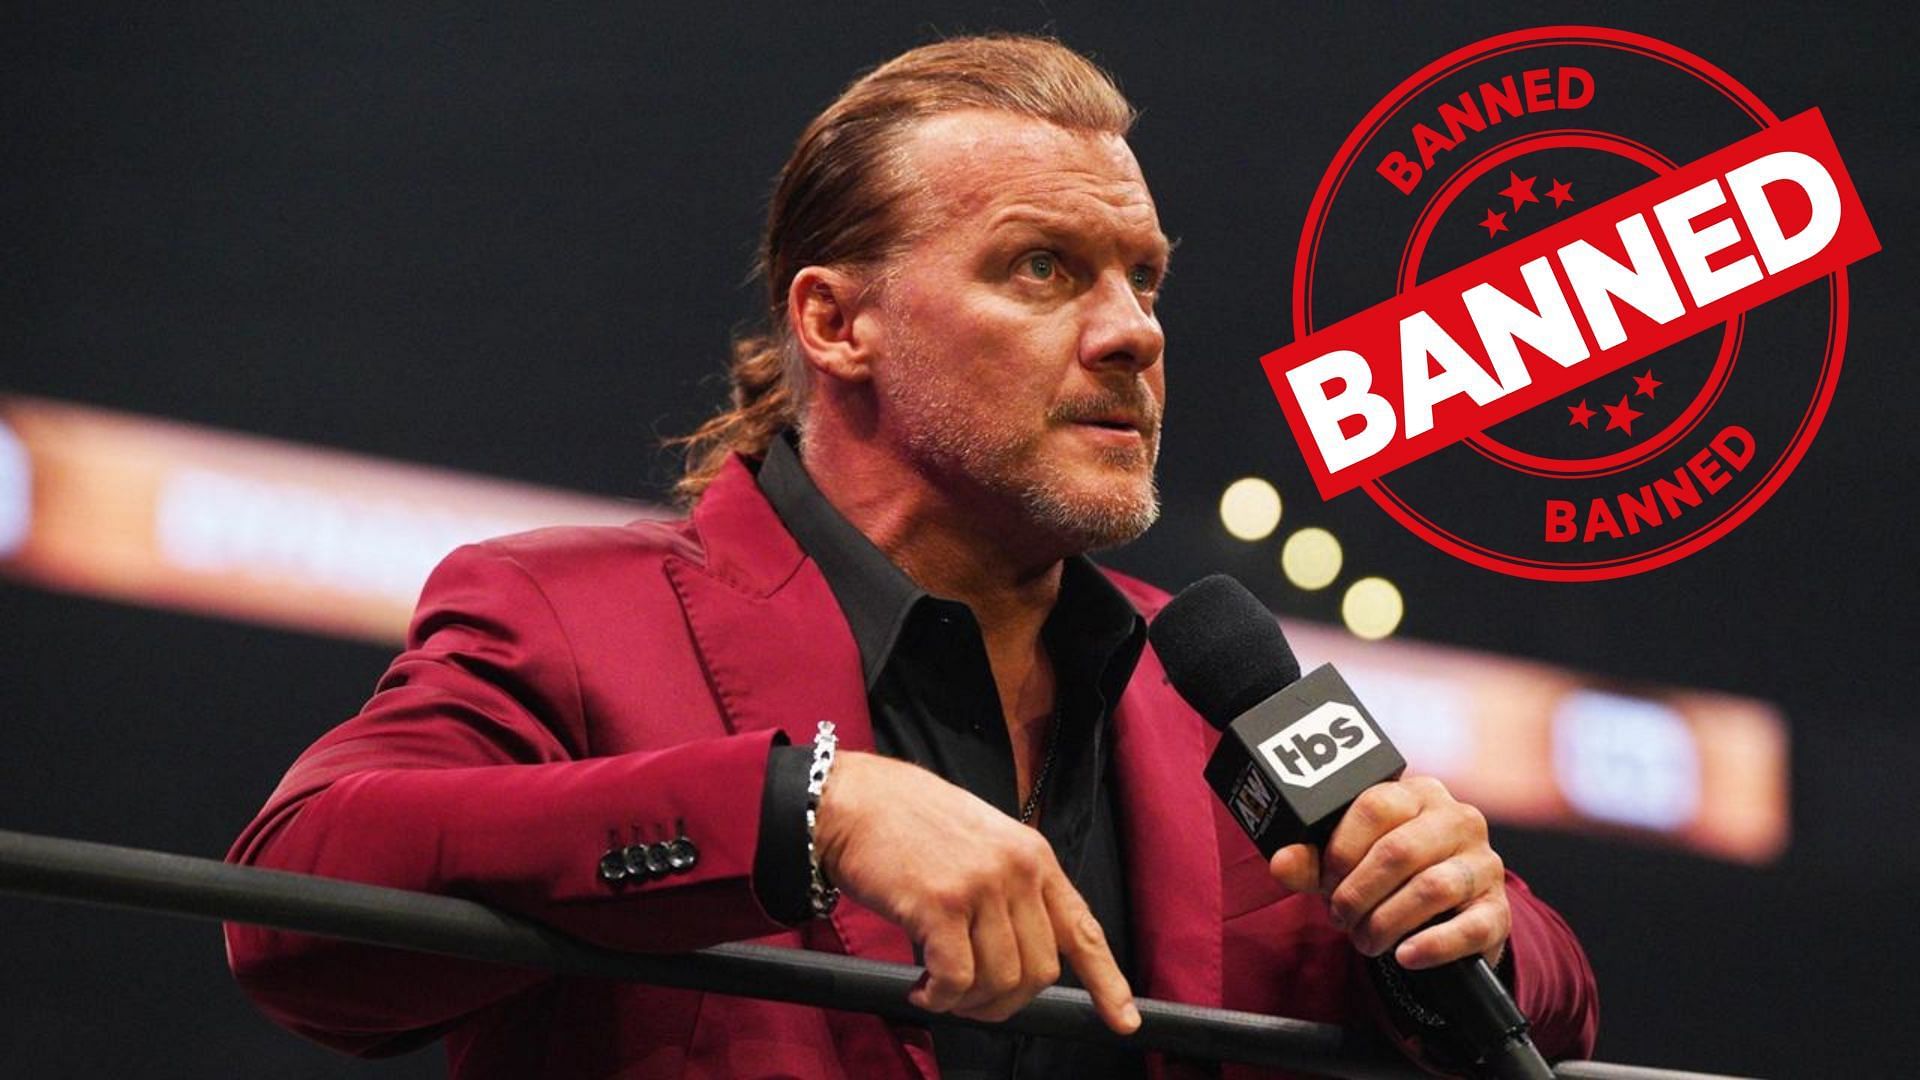 Chris Jericho has been banned on a platform